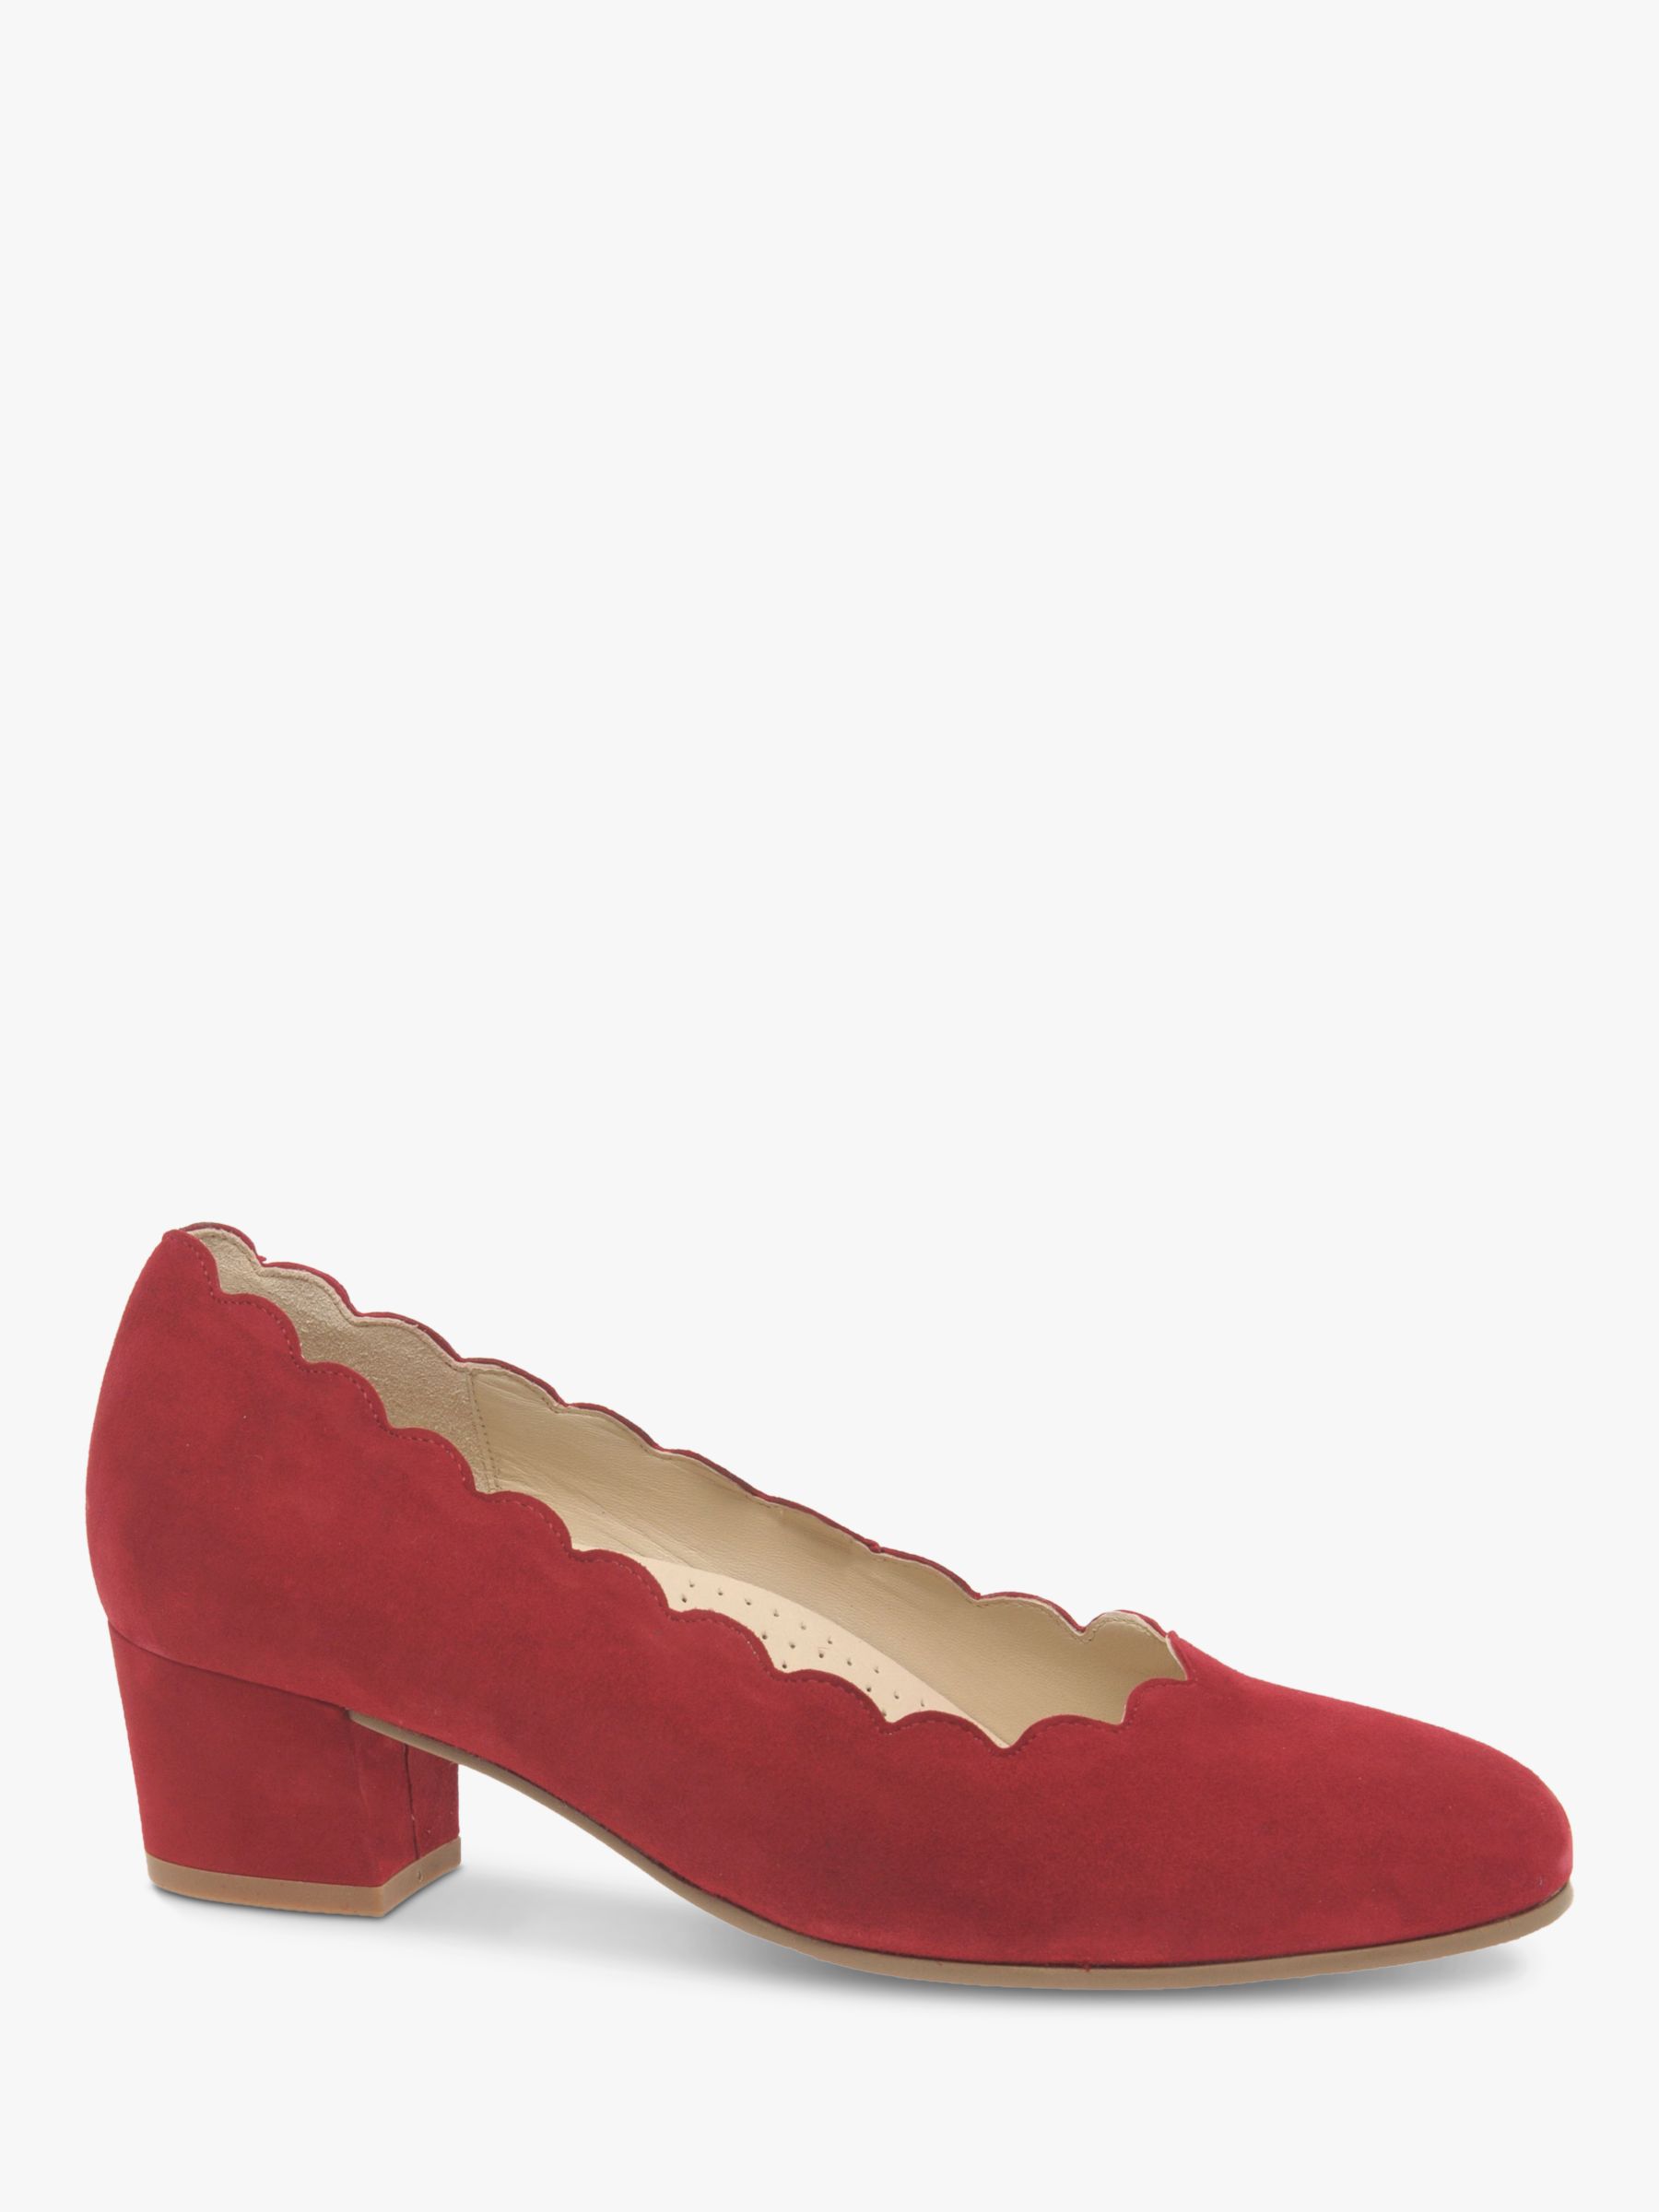 Gabor Gigi Wide Fit Suede Block Heeled Court Shoes, Red at John Lewis ...